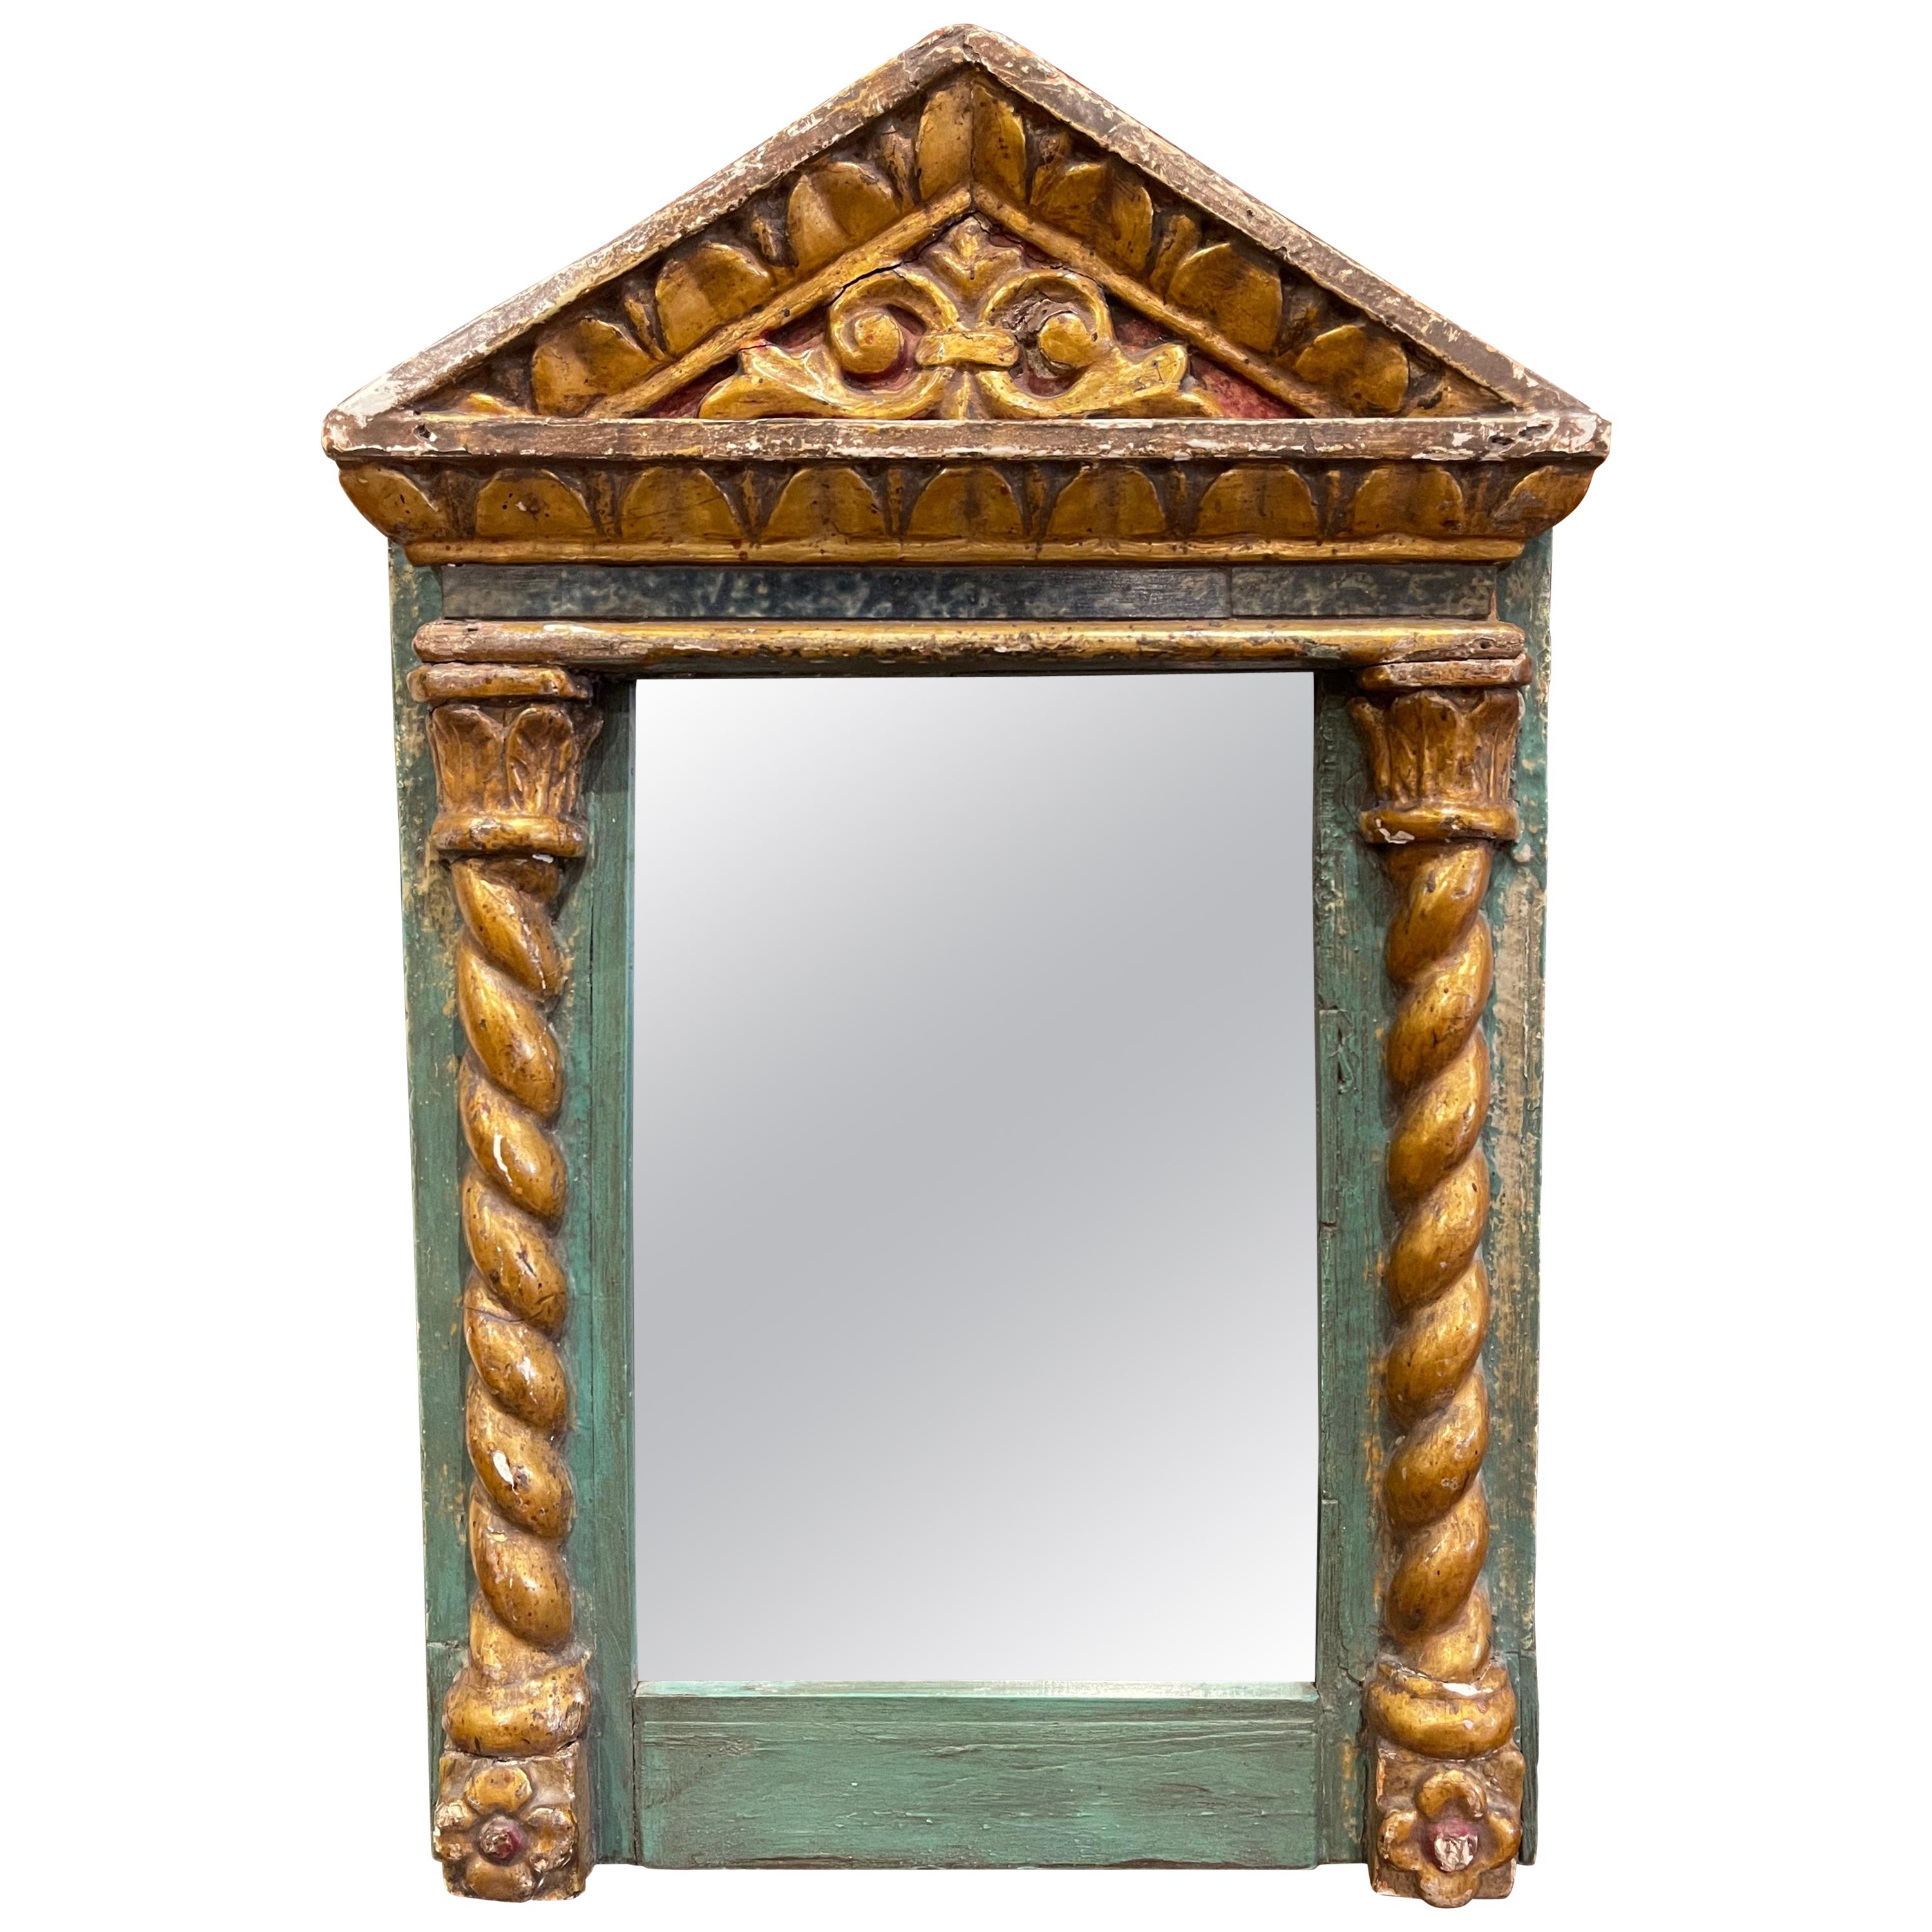 18th Century Italian Baroque Carved Giltwood and Polychrome Wall Mirror